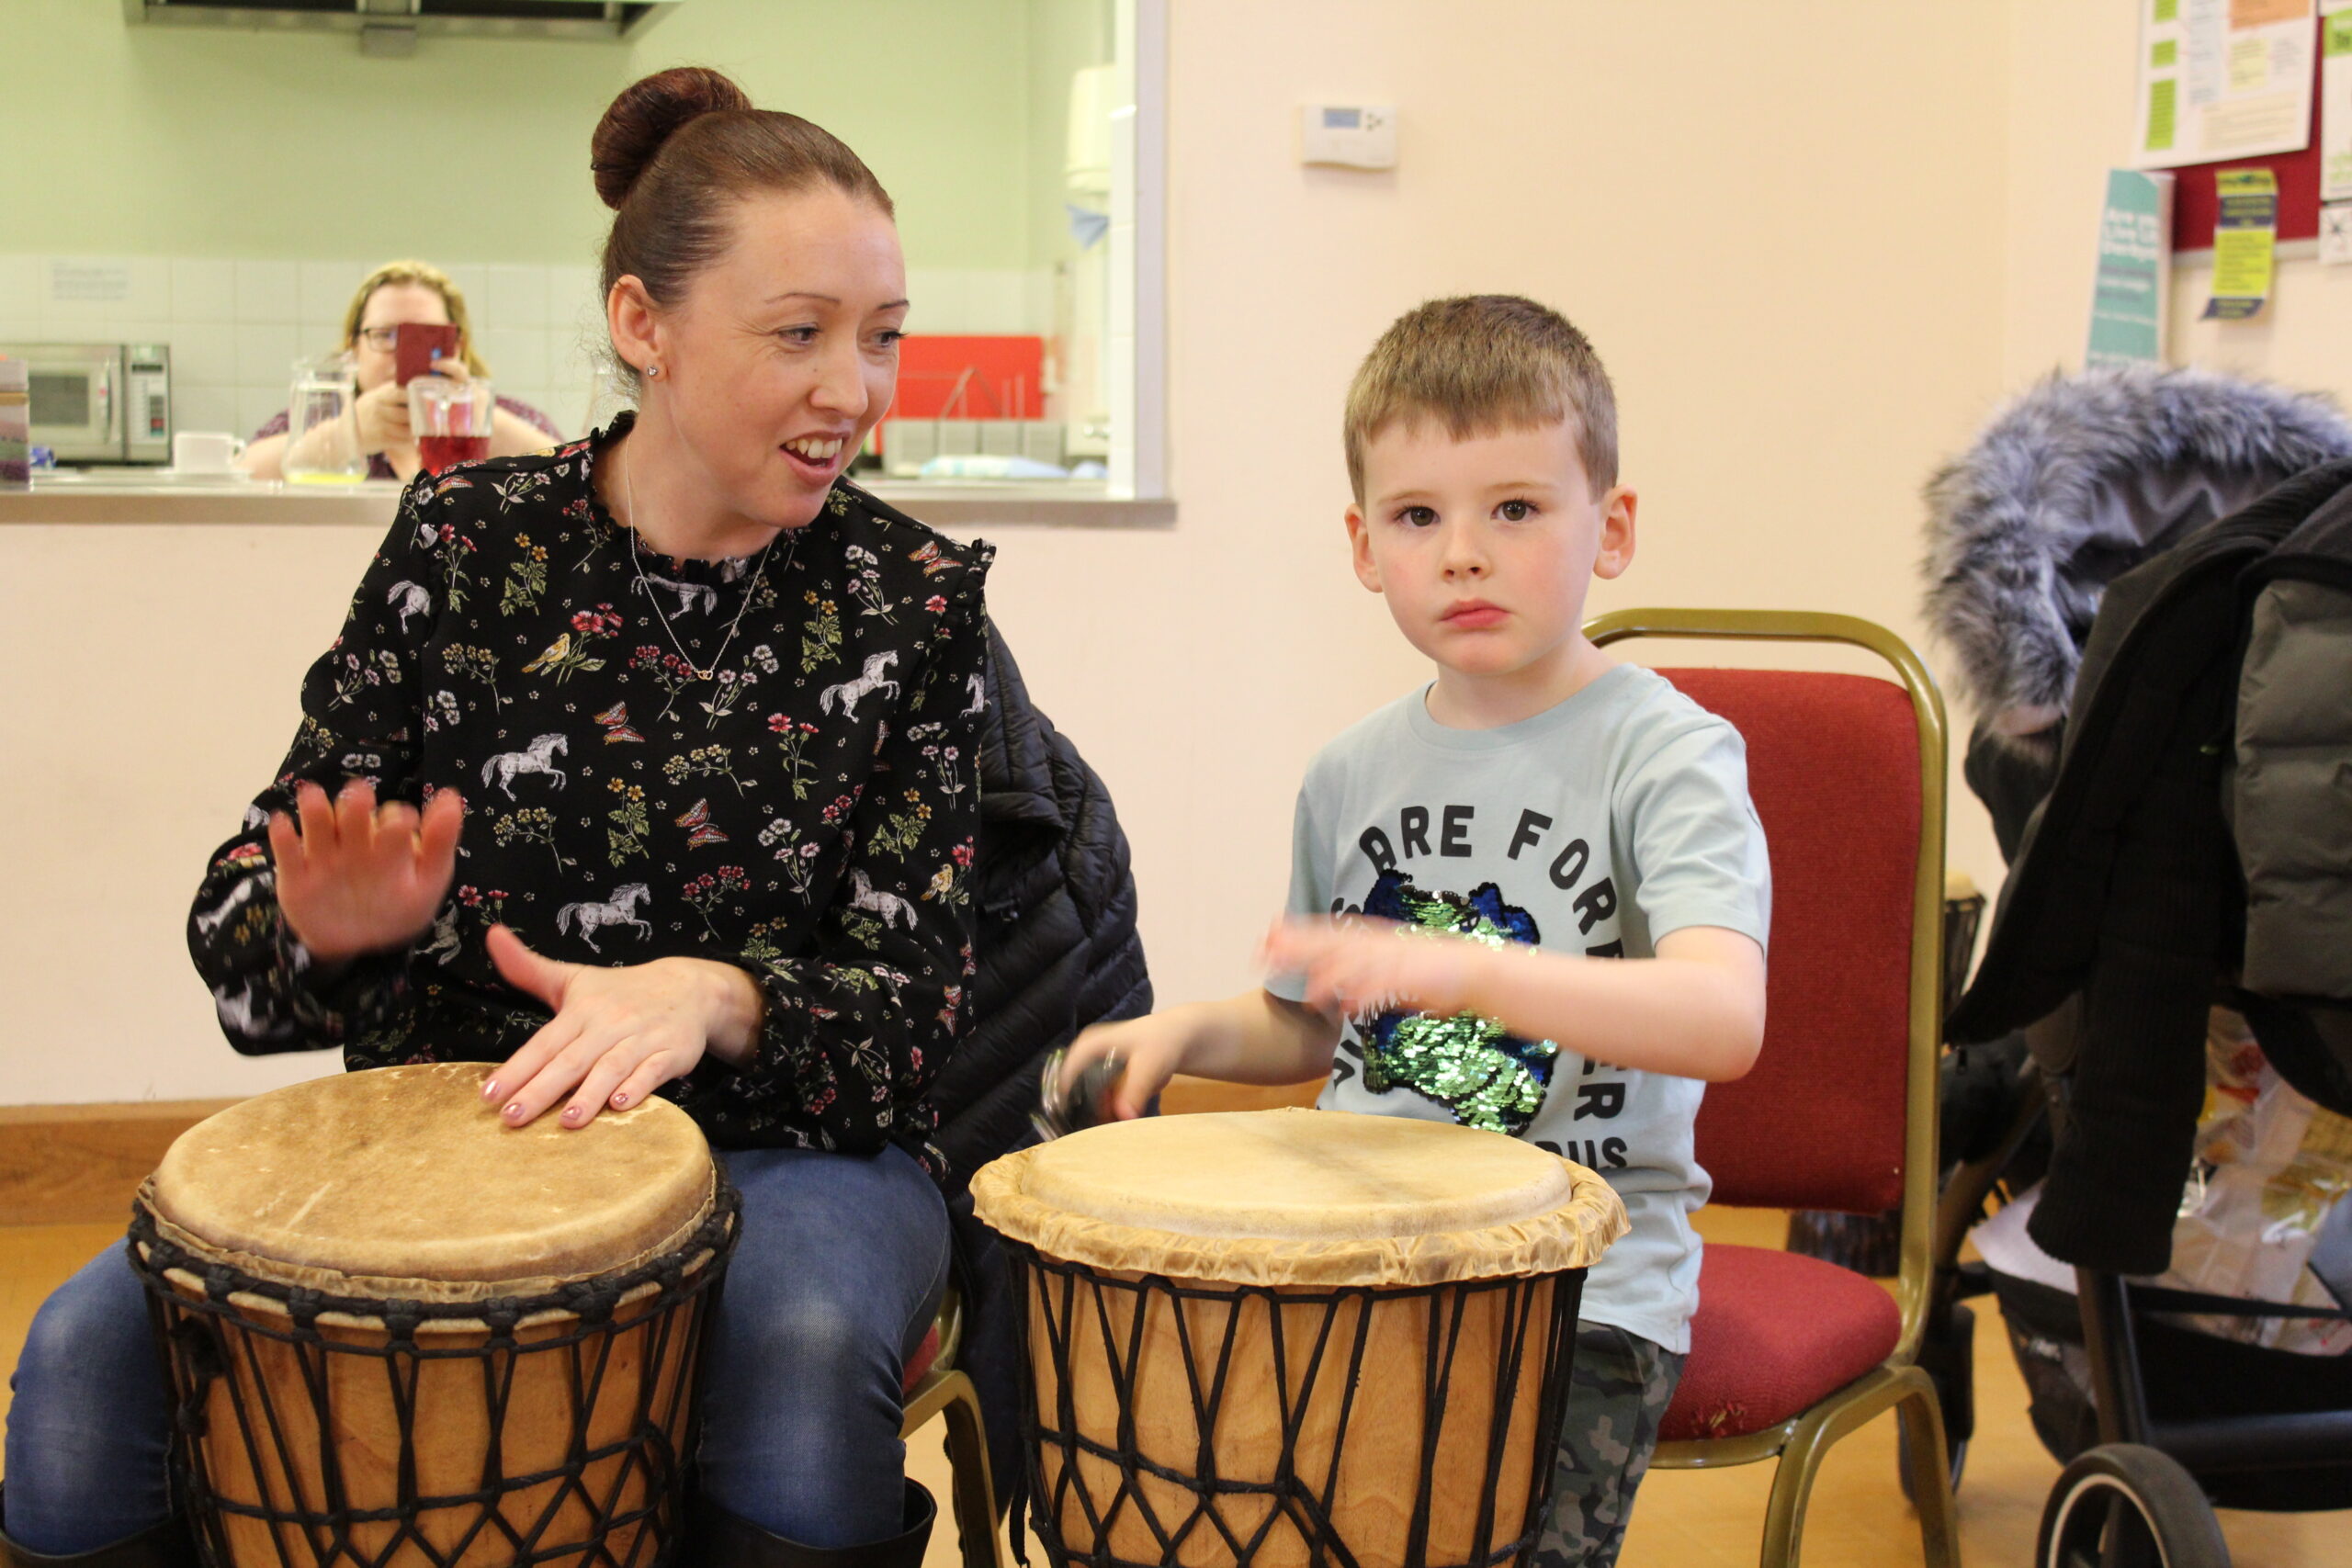 Woman and young boy sitting, drumming in room